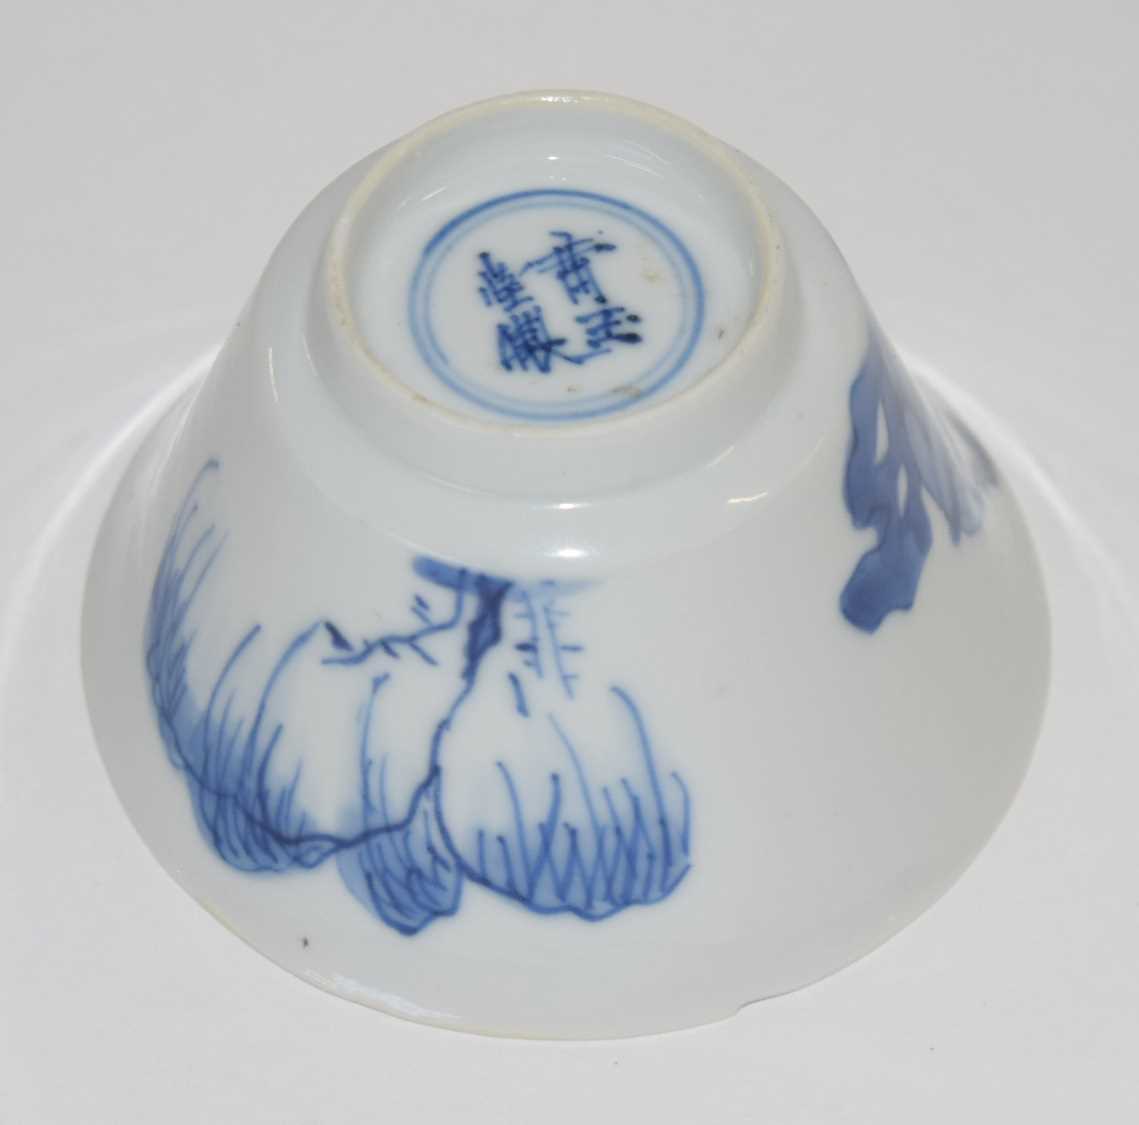 Chinese Teabowl with Jumping Boy pattern - Image 2 of 2